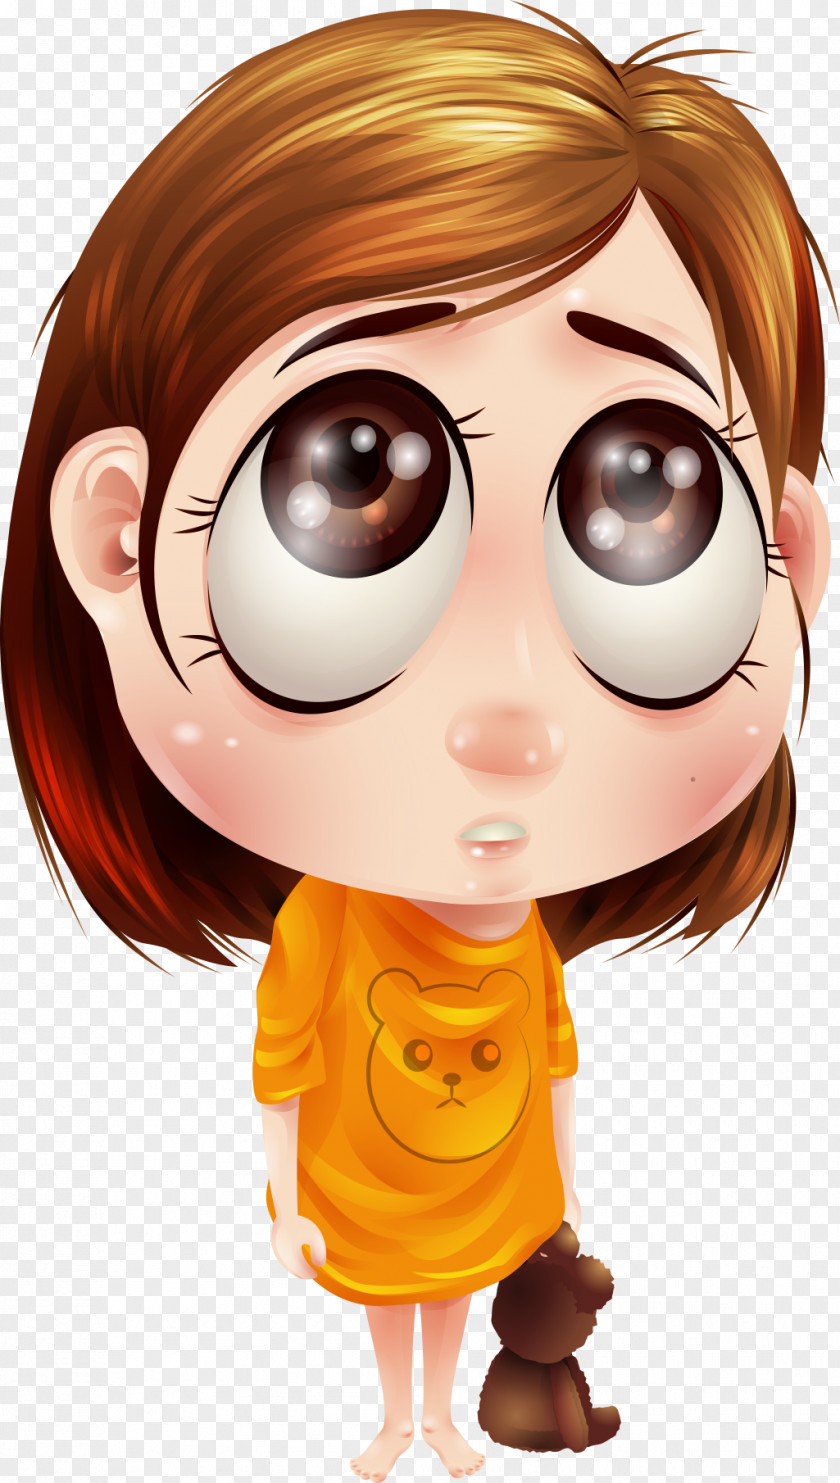 Cartoon Animation Illustration PNG Illustration, Cute girl with big eyes clipart PNG